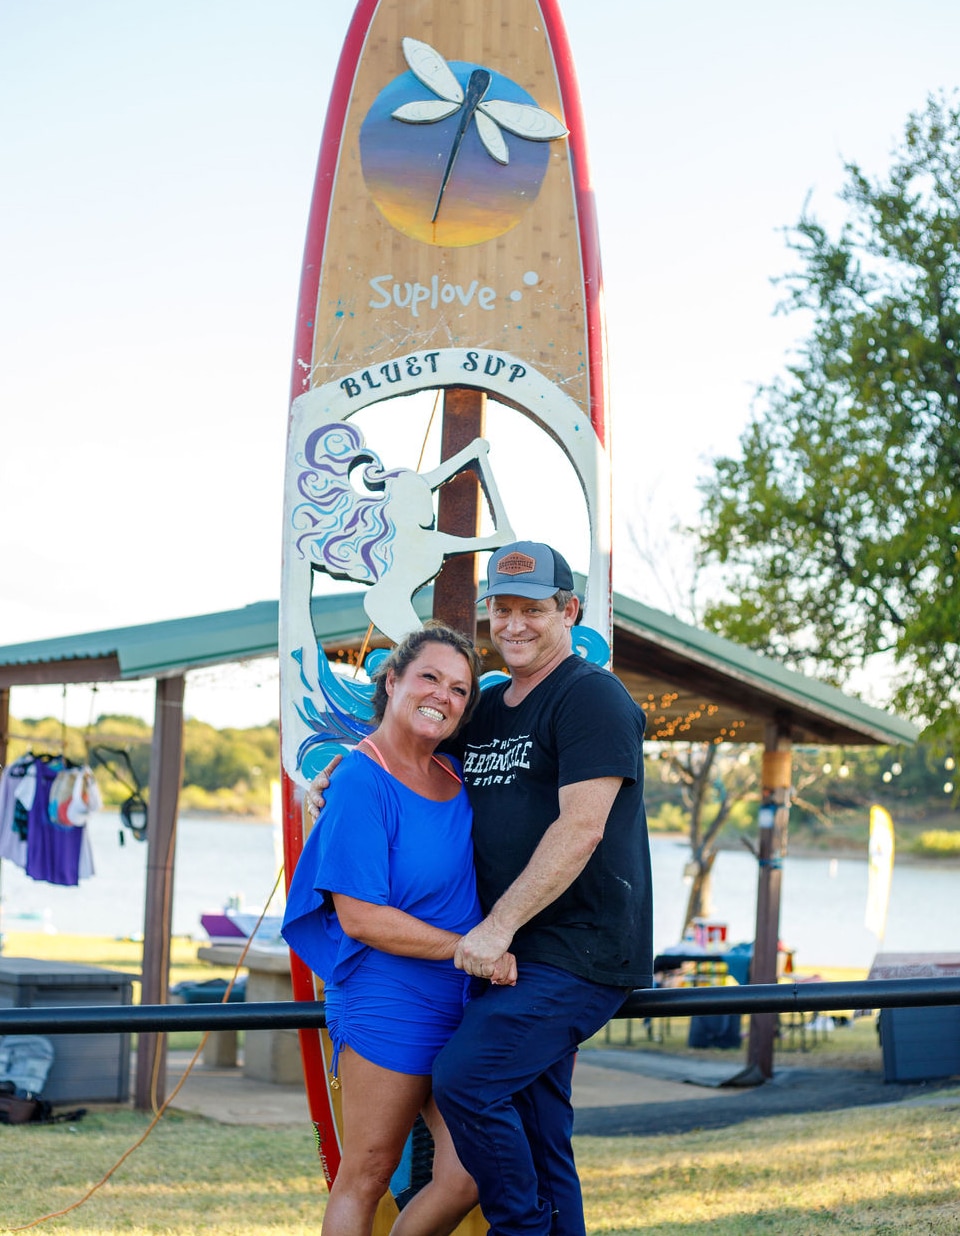 Bluet Sup's owner, Juliet and Chef Michael Scott standing in front of a custom board